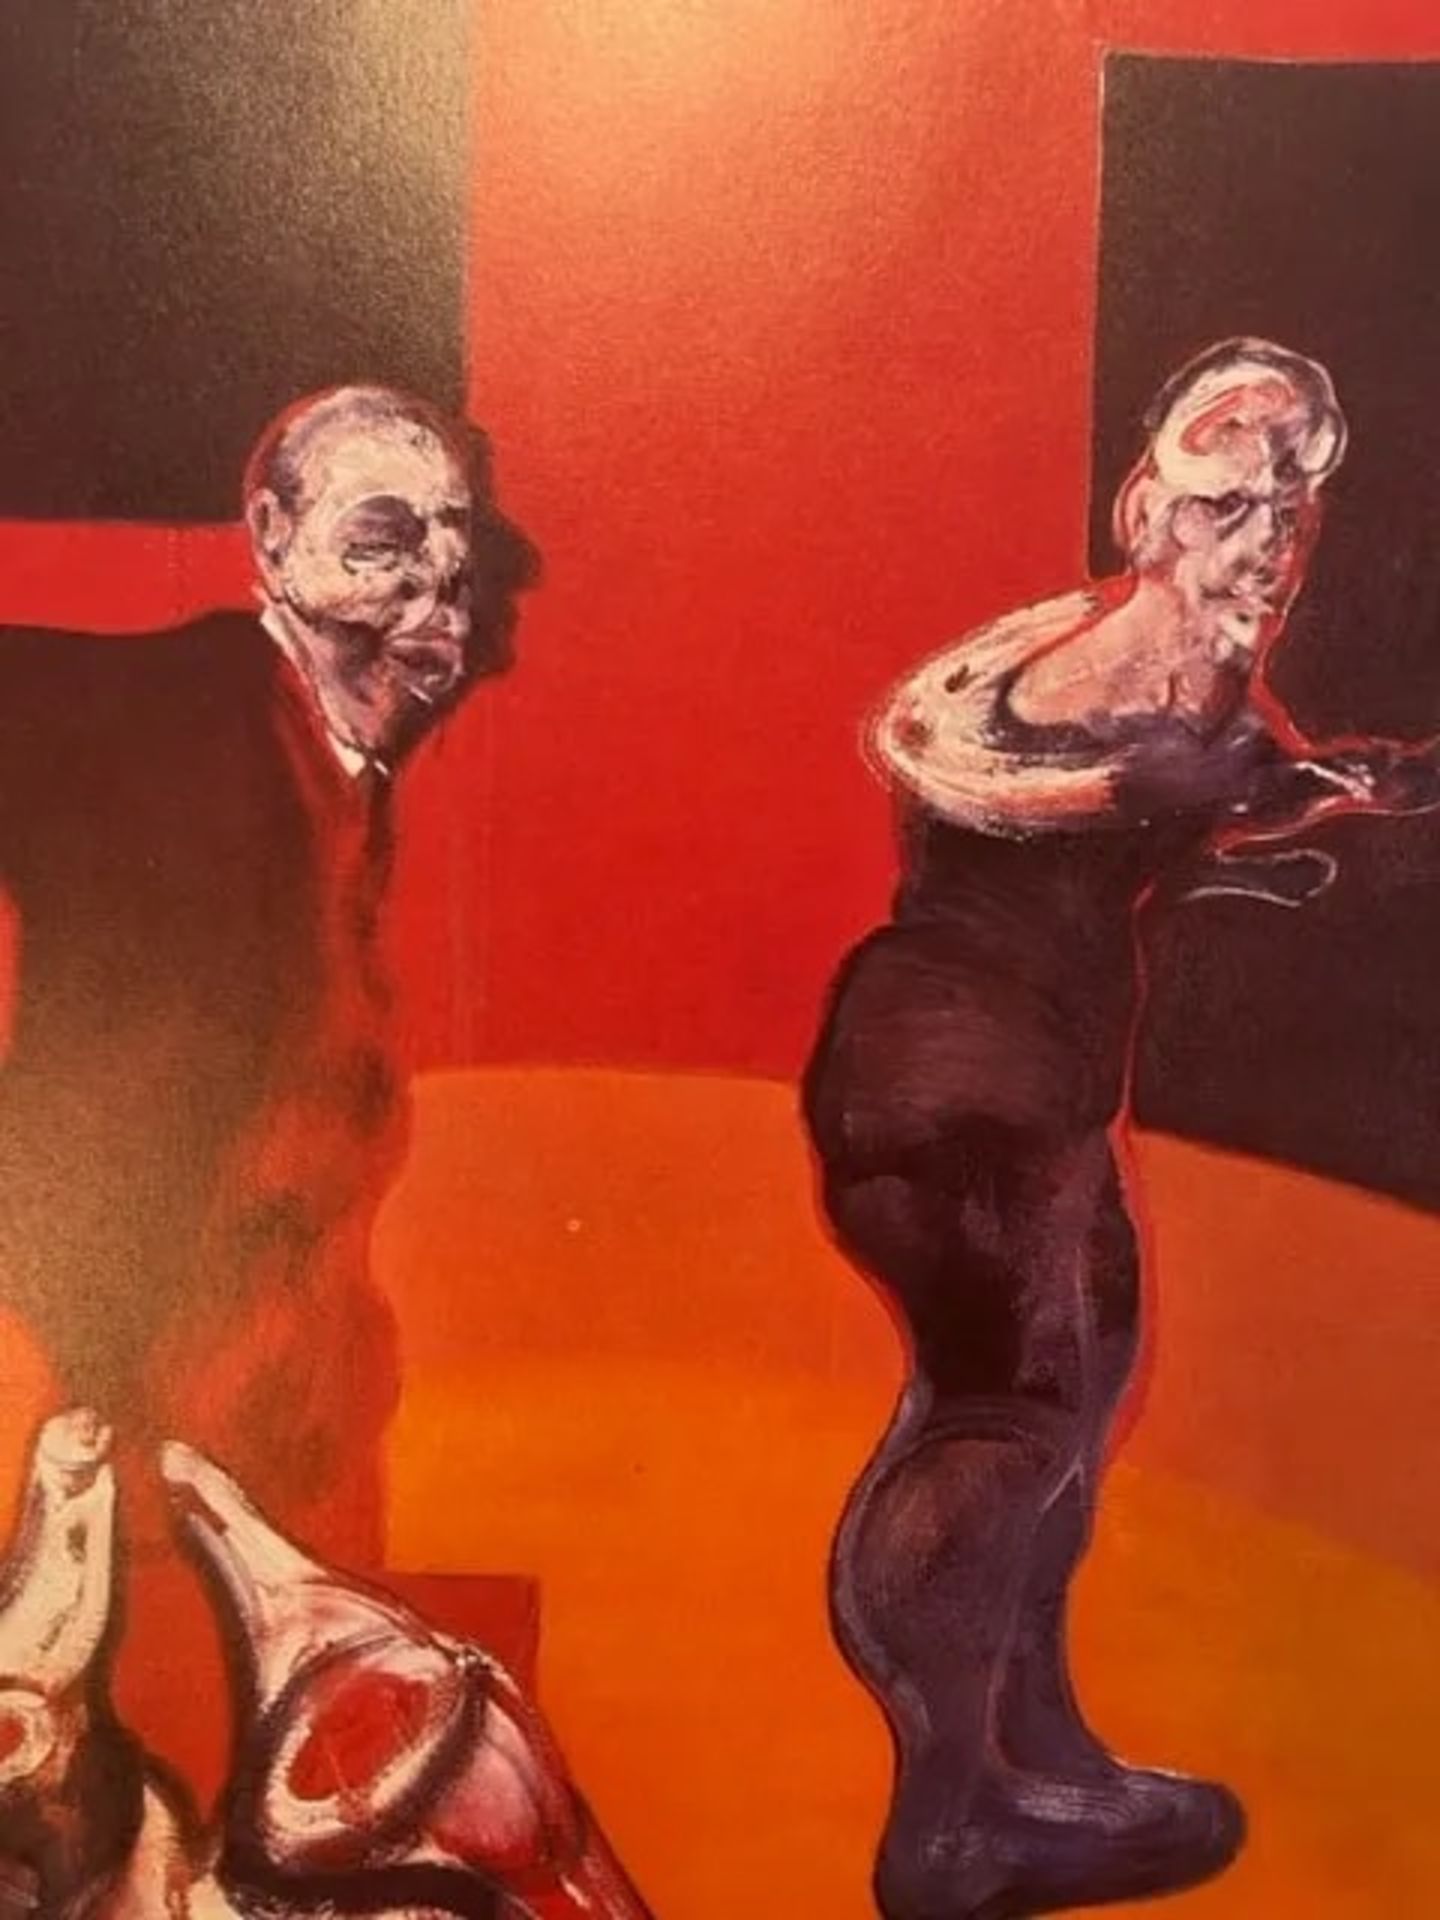 Francis Bacon "Three Studies for a Crucifixion" Print - Image 3 of 6